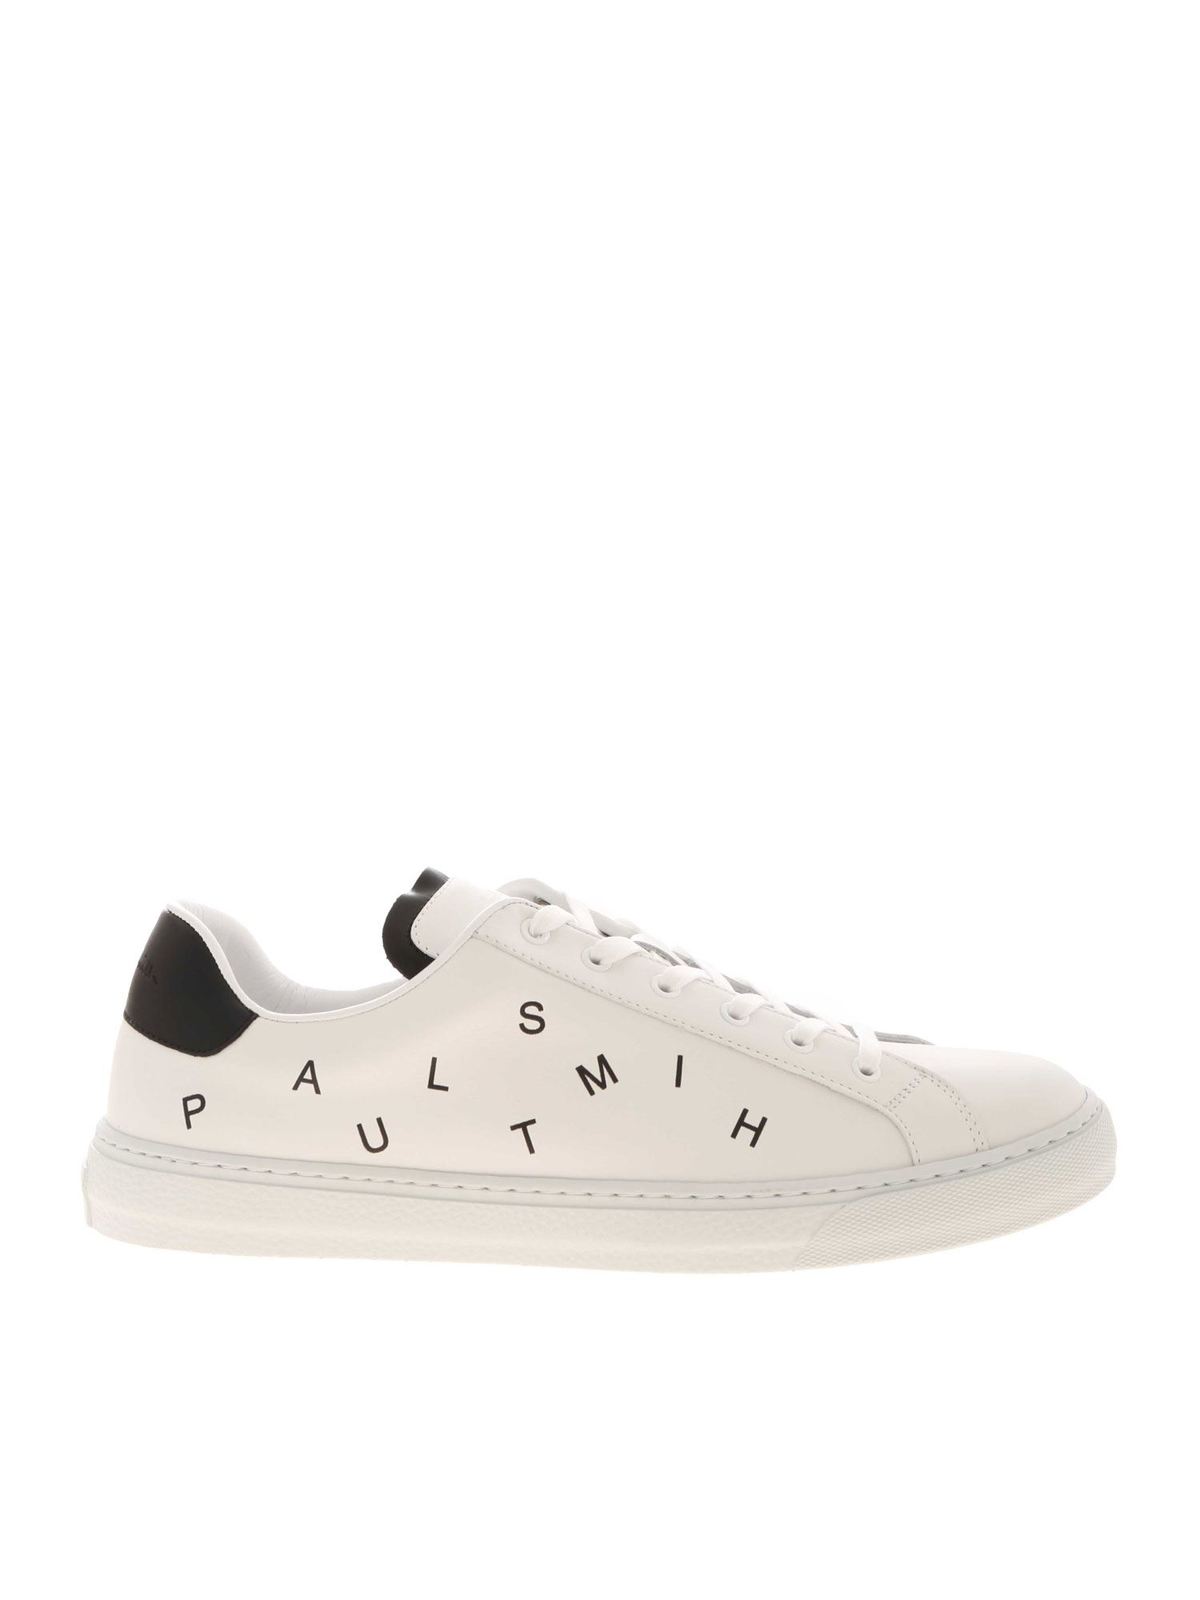 Paul Smith - Sneakers Hansen bianche - sneakers - M1SHAN15AMOLV01